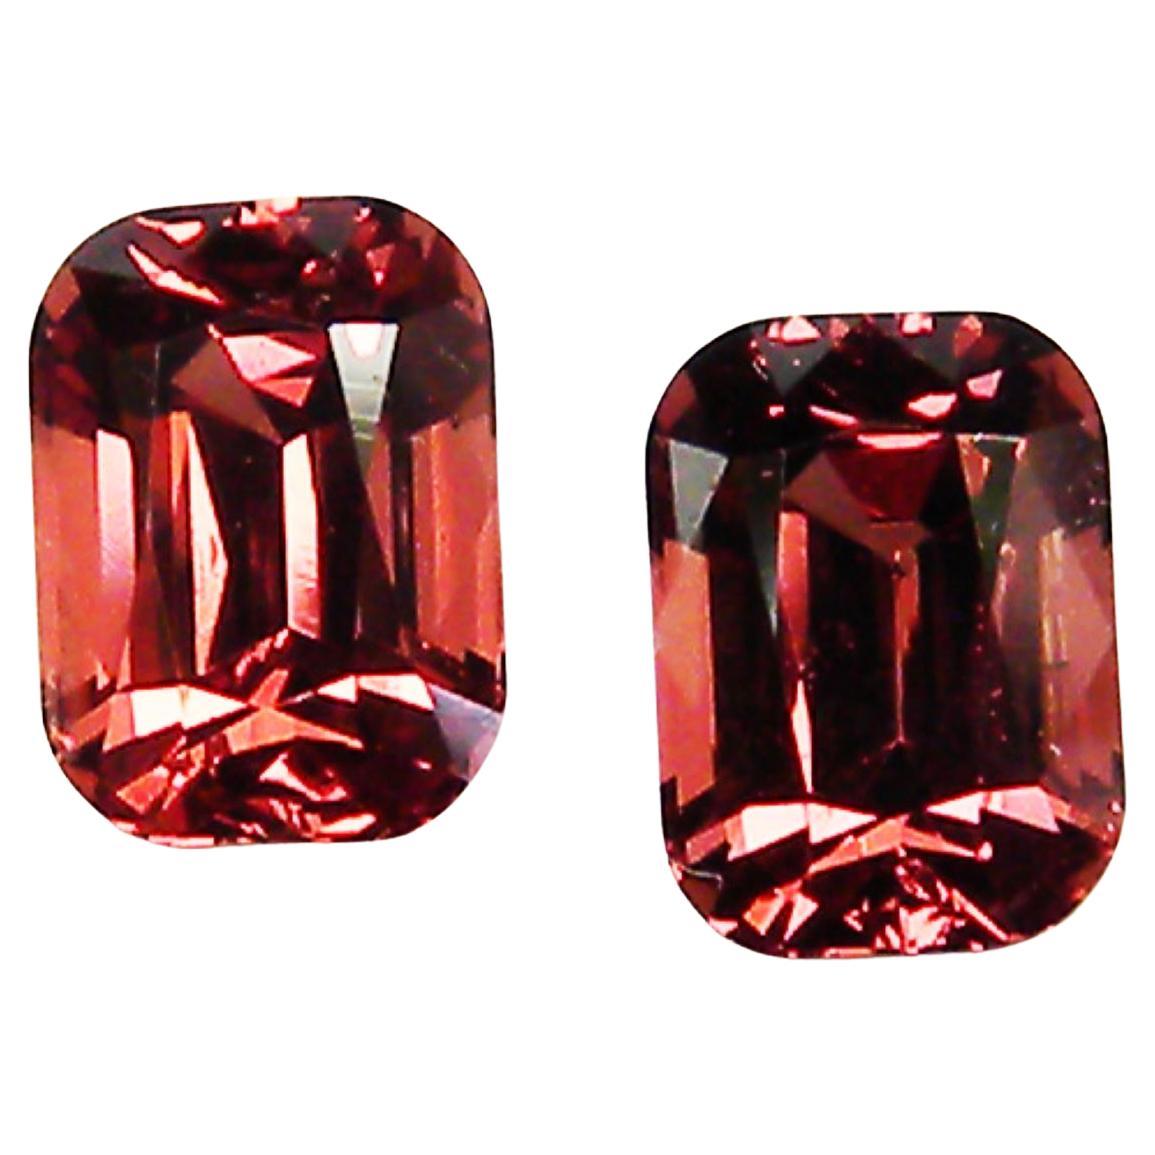 2 Red Spinels Cts 2.11